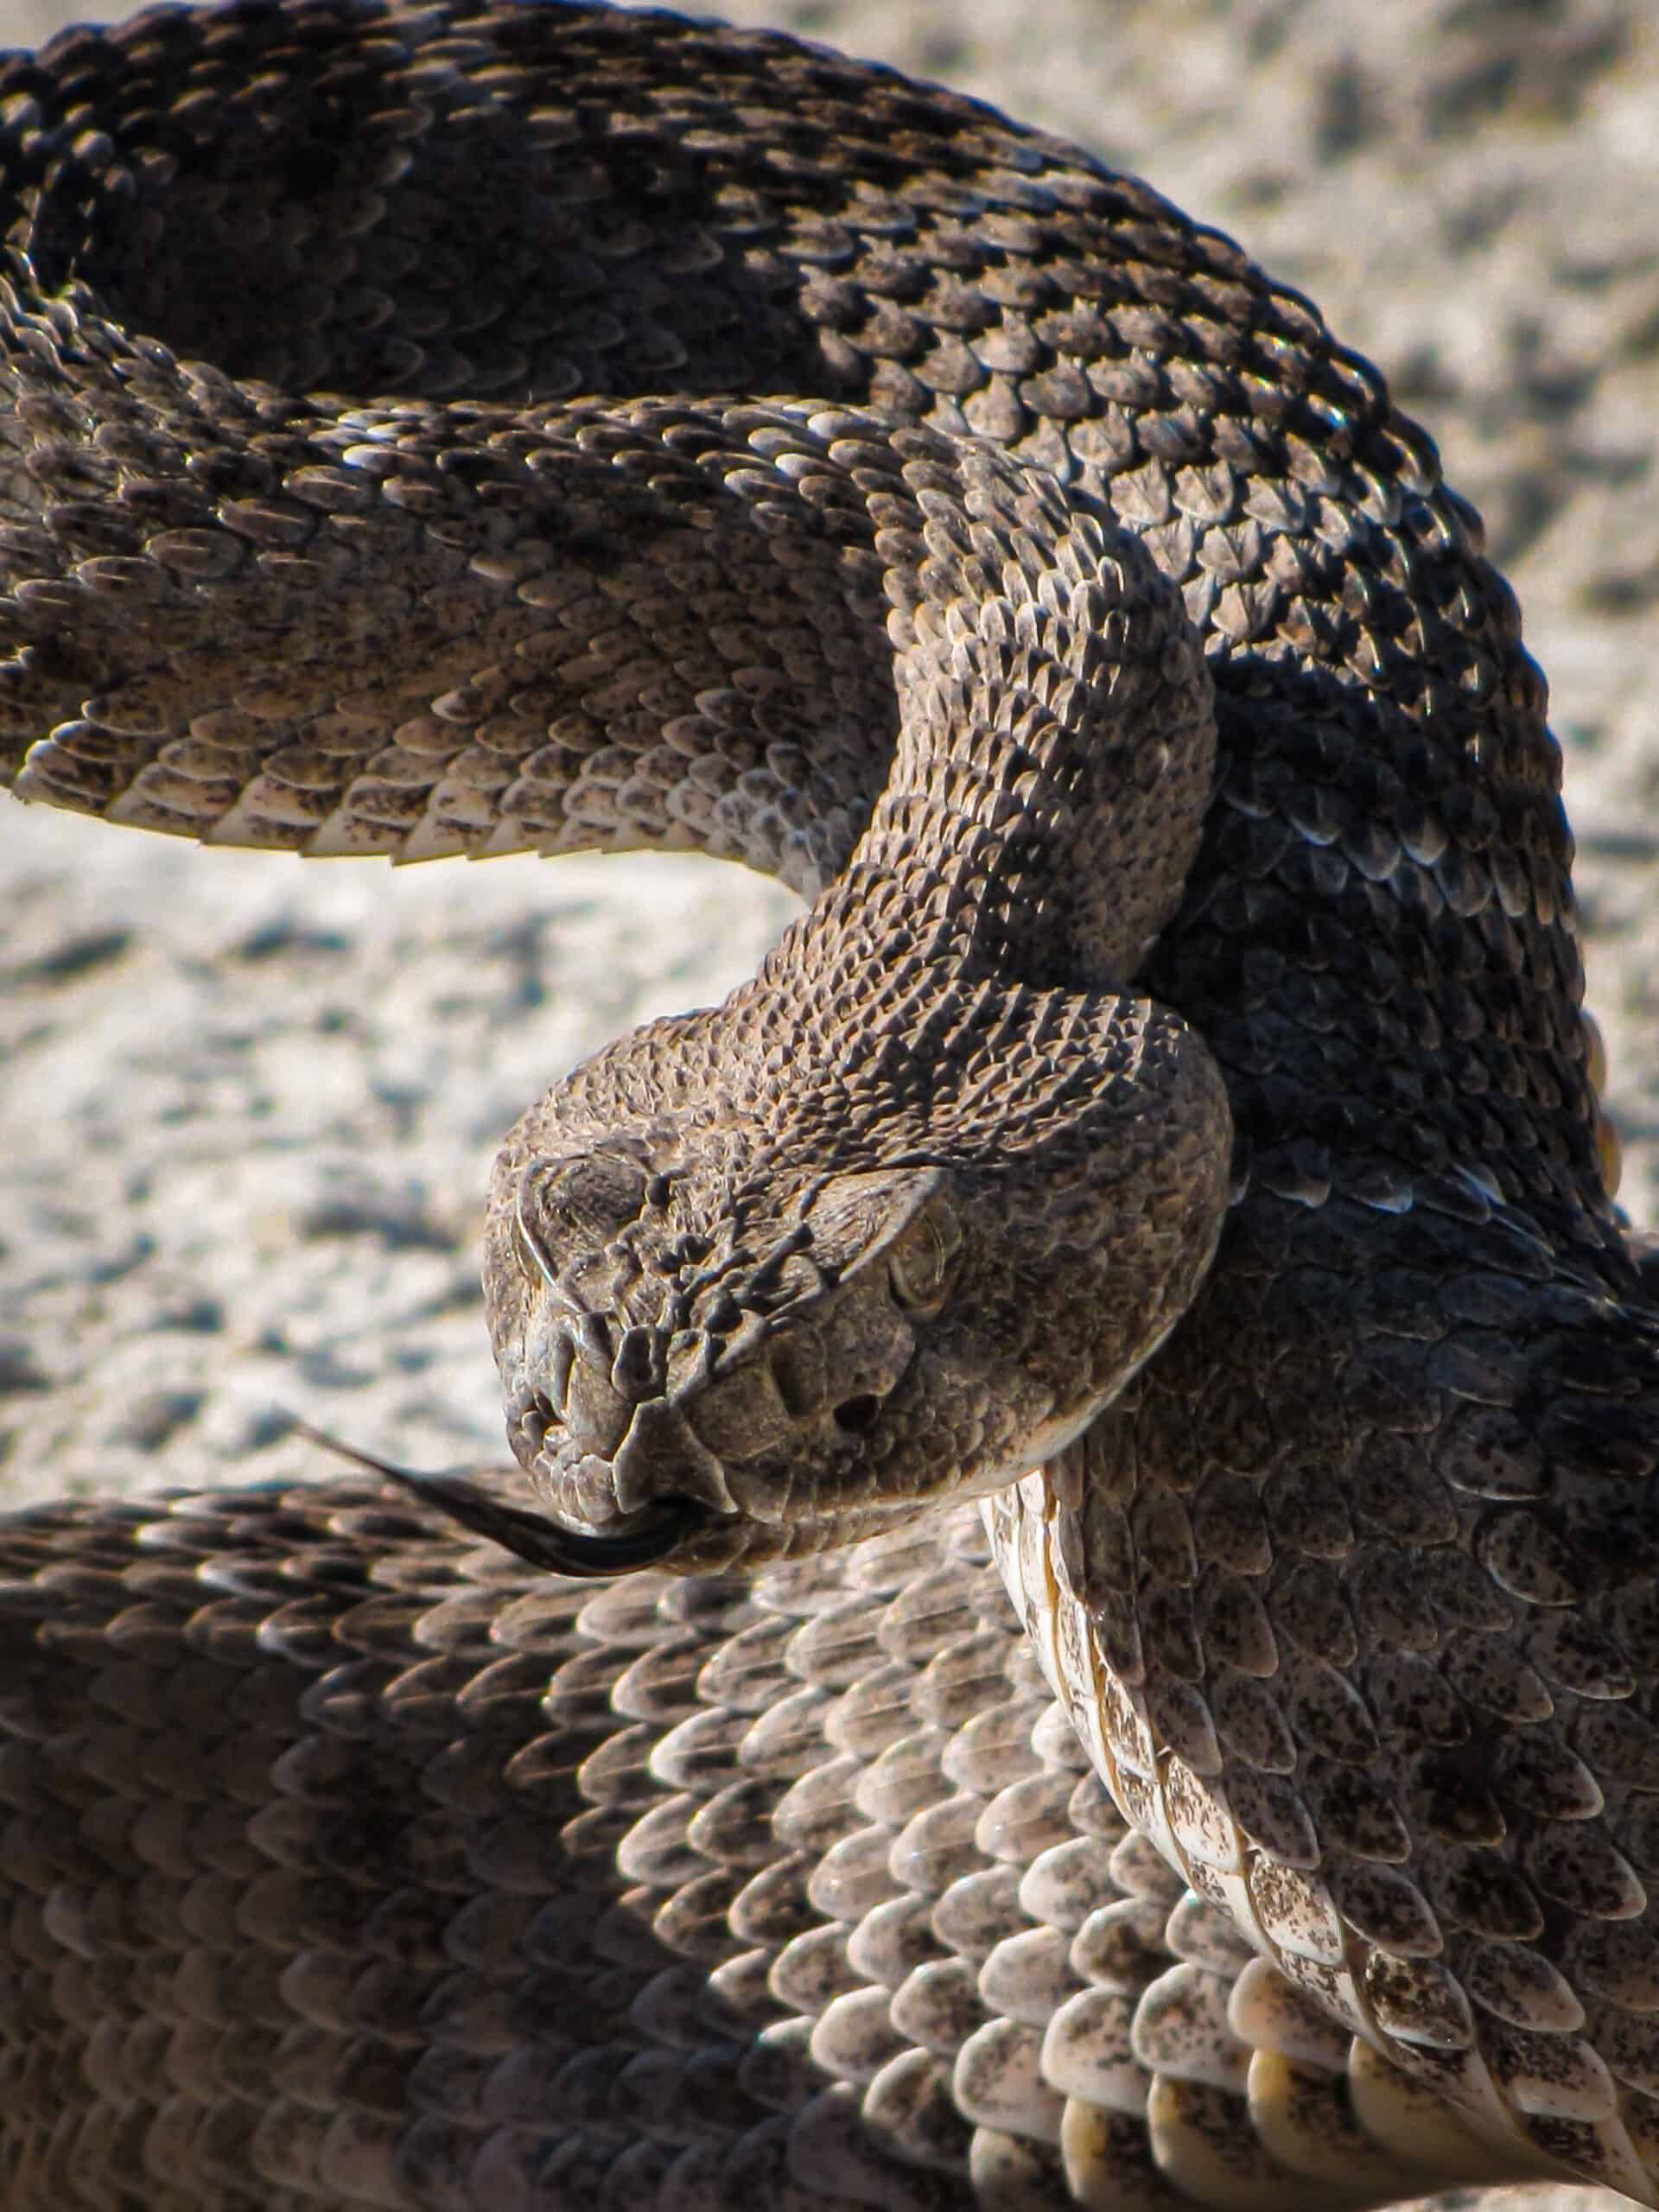 Rattlesnakes in the National Parks